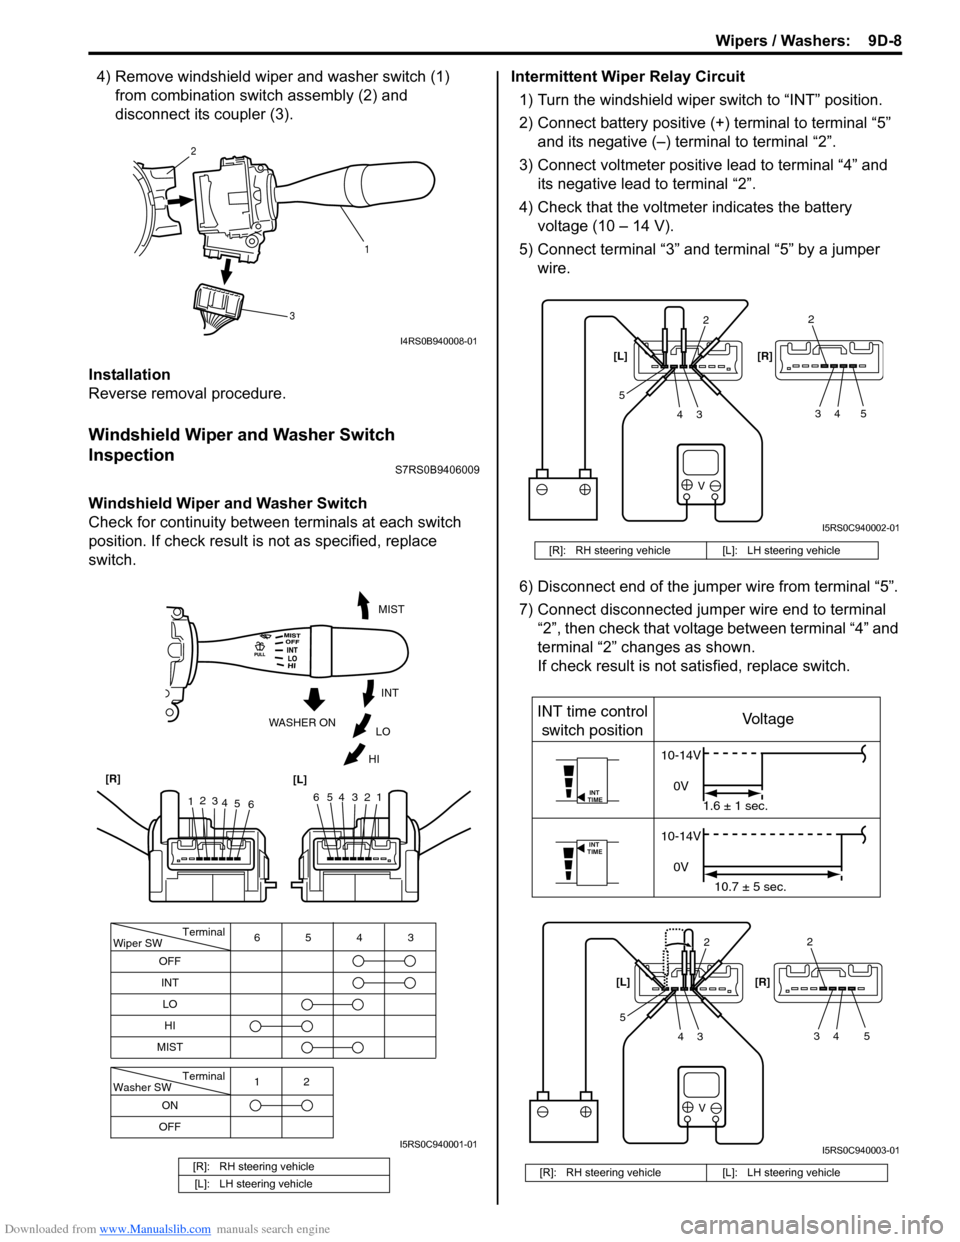 SUZUKI SWIFT 2007 2.G Service Workshop Manual Downloaded from www.Manualslib.com manuals search engine Wipers / Washers:  9D-8
4) Remove windshield wiper and washer switch (1) from combination swit ch assembly (2) and 
disconnect its coupler (3).